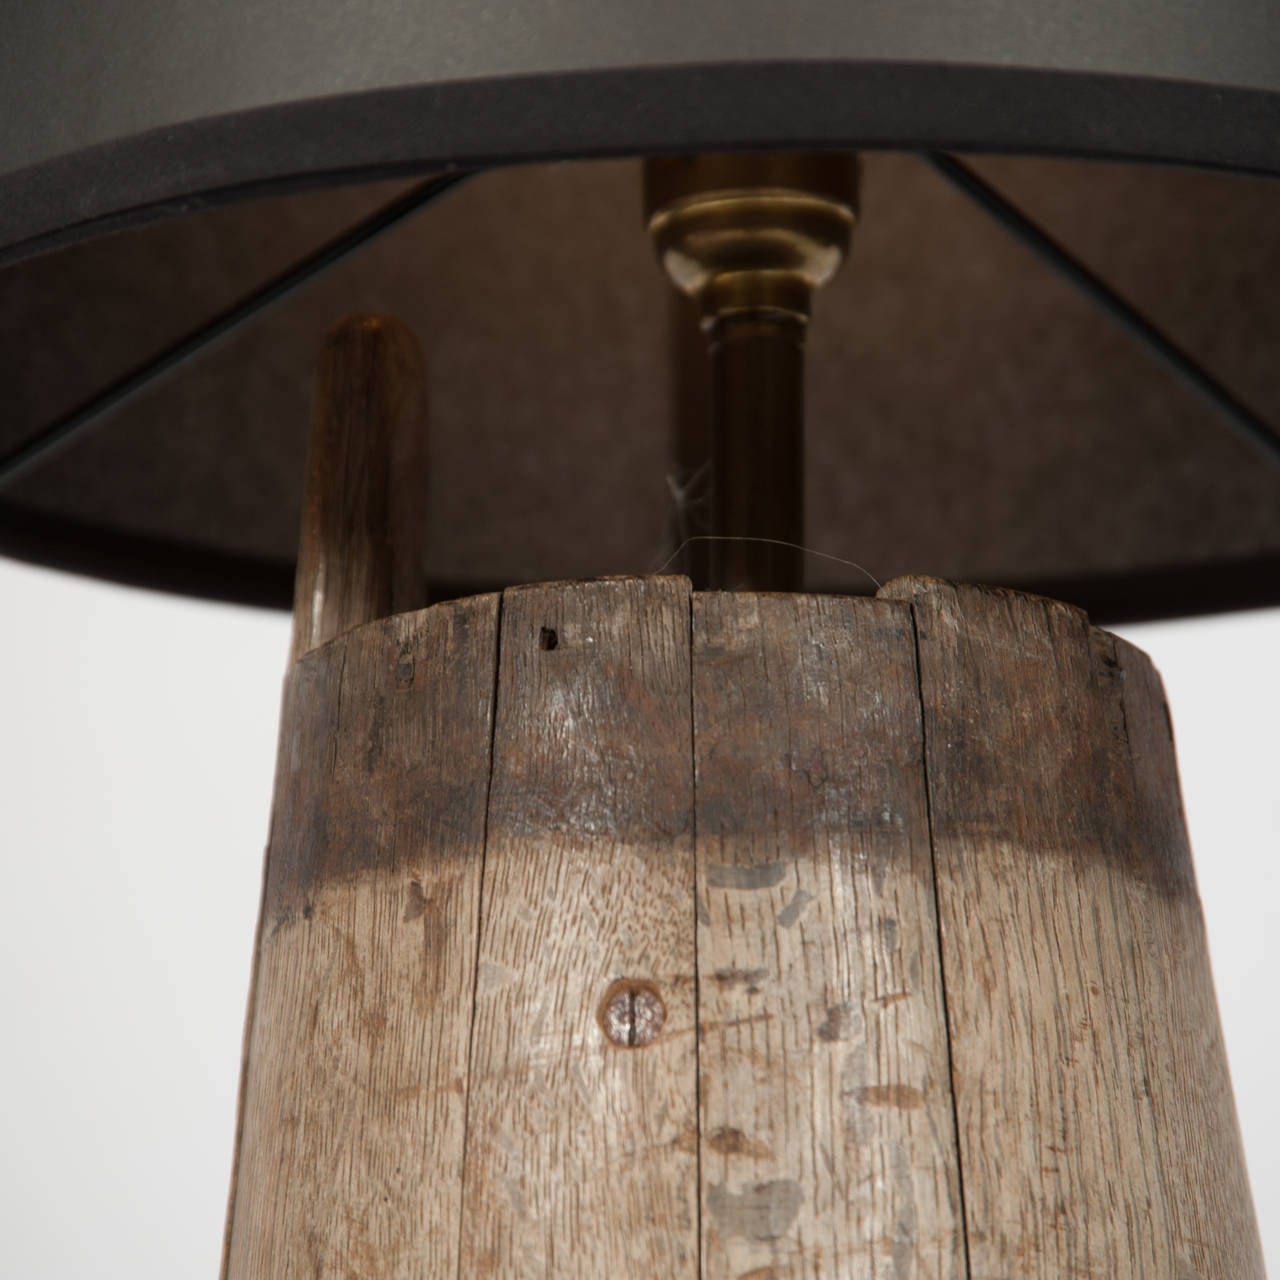 19th Century Dutch Coopers-Made Barrel Butter Churn, Now Electrified as a Lamp For Sale 1